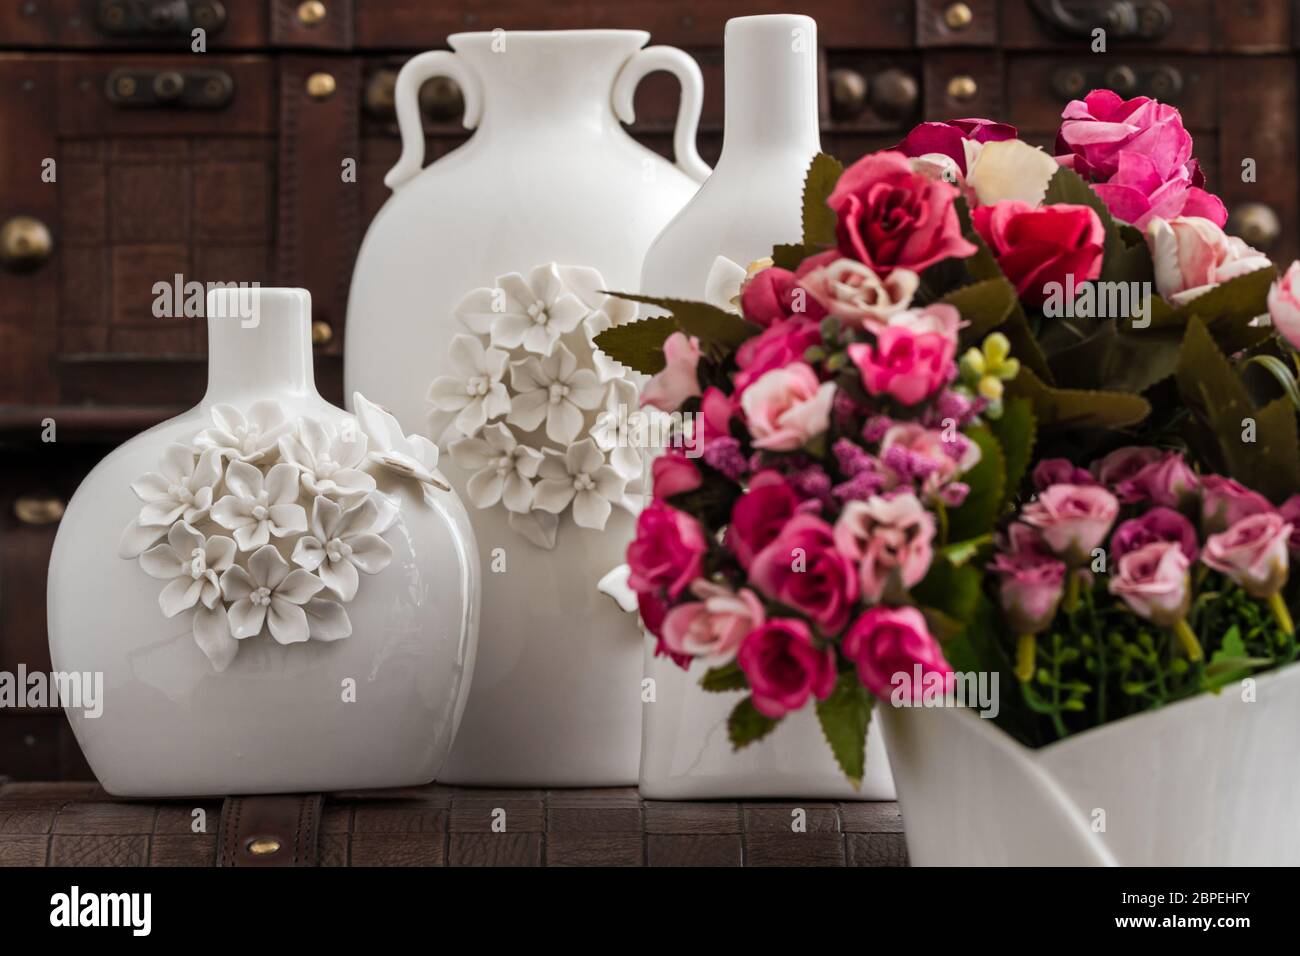 Different decorative white vases with 3d flower and butterfly designs Stock Photo